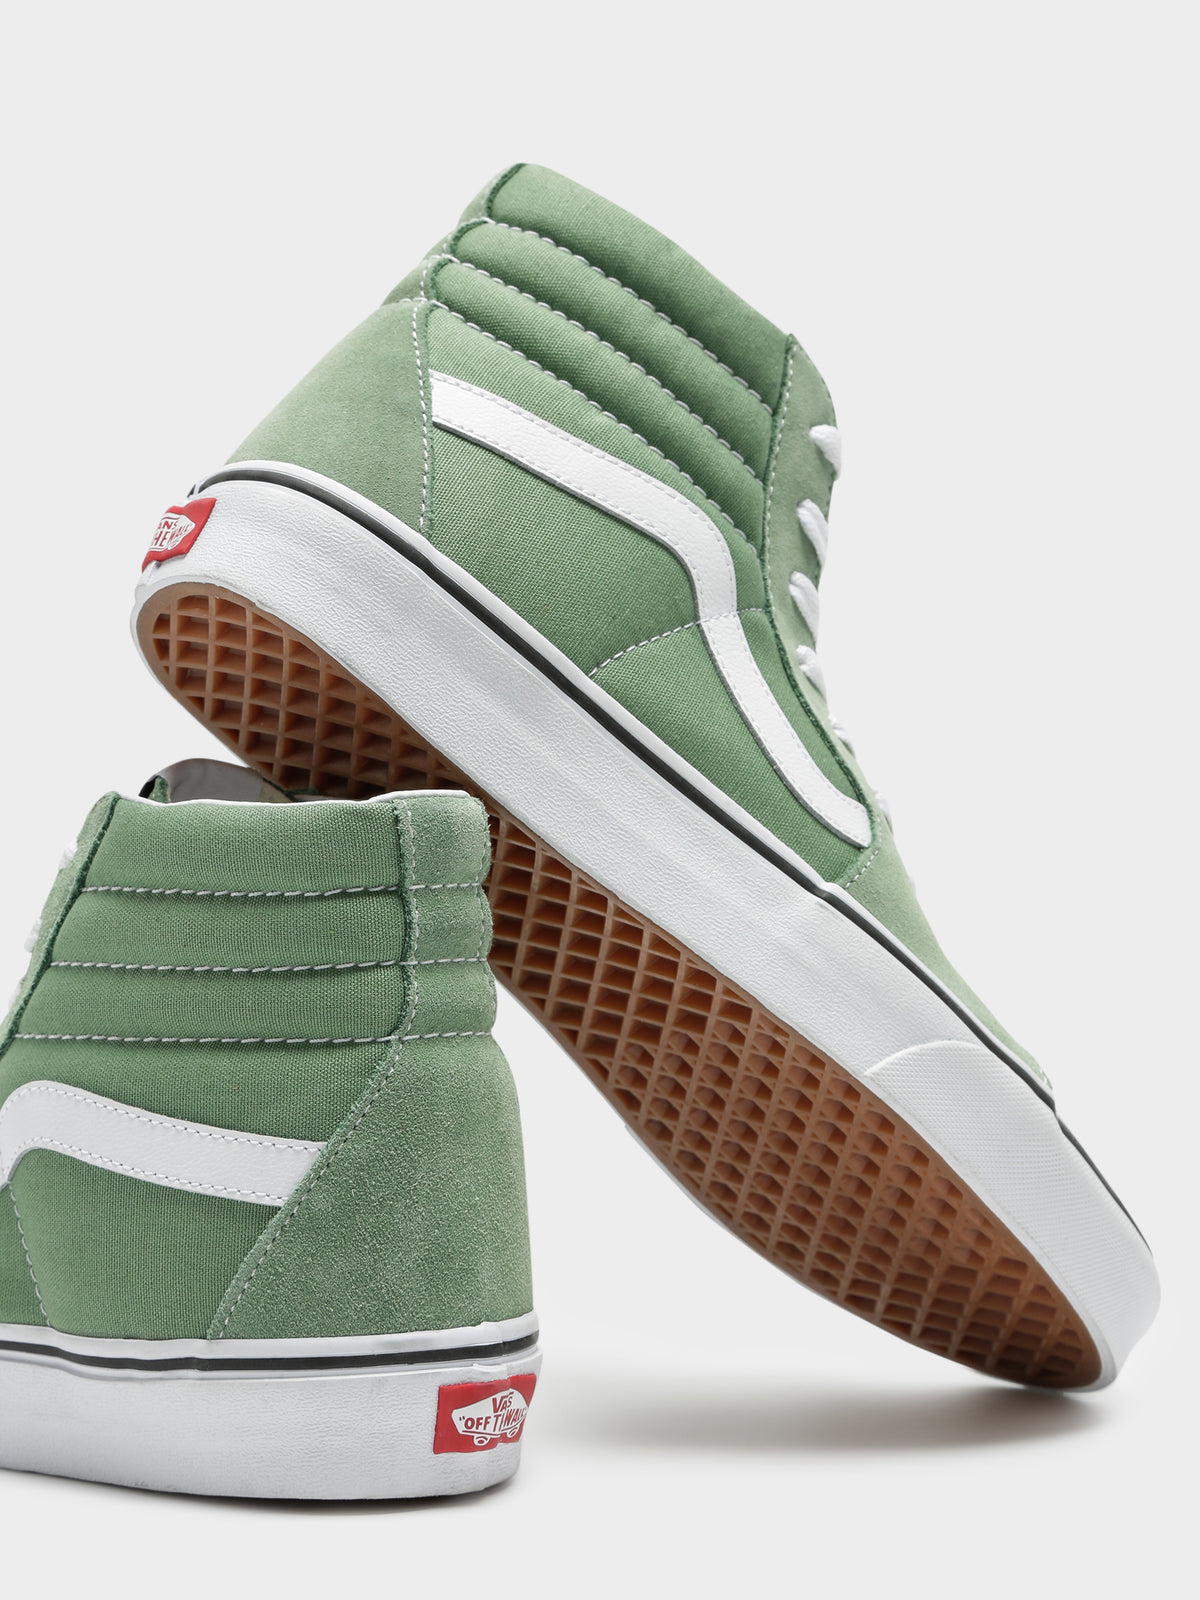 Unisex SK8 Hi Sneakers in Shale Green &amp; White